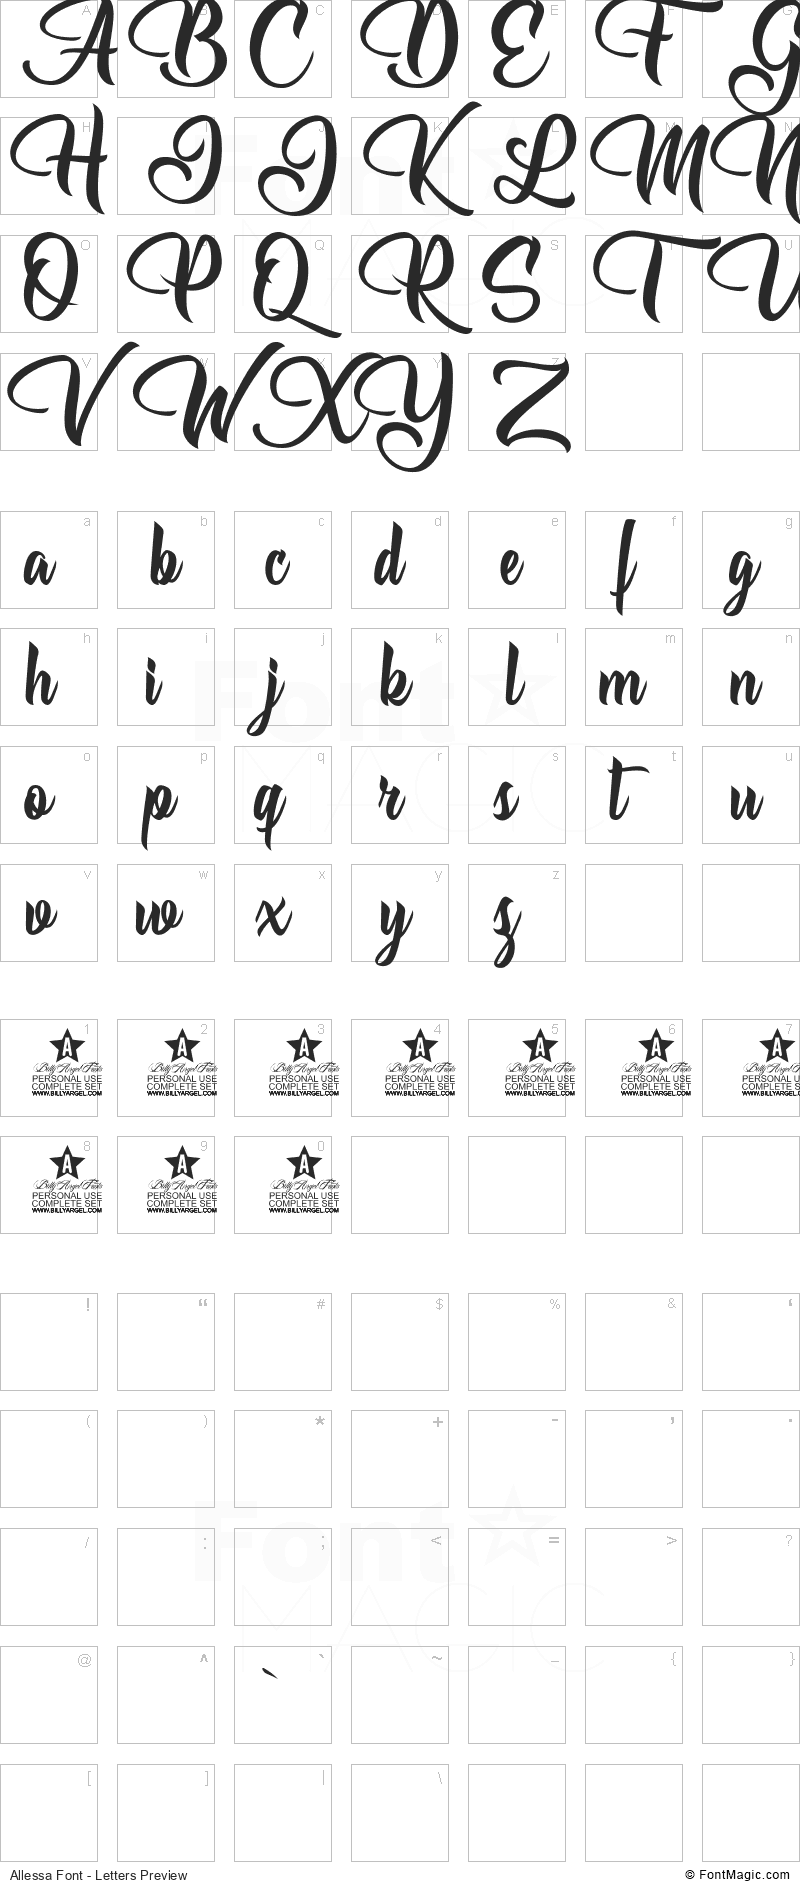 Allessa Font - All Latters Preview Chart